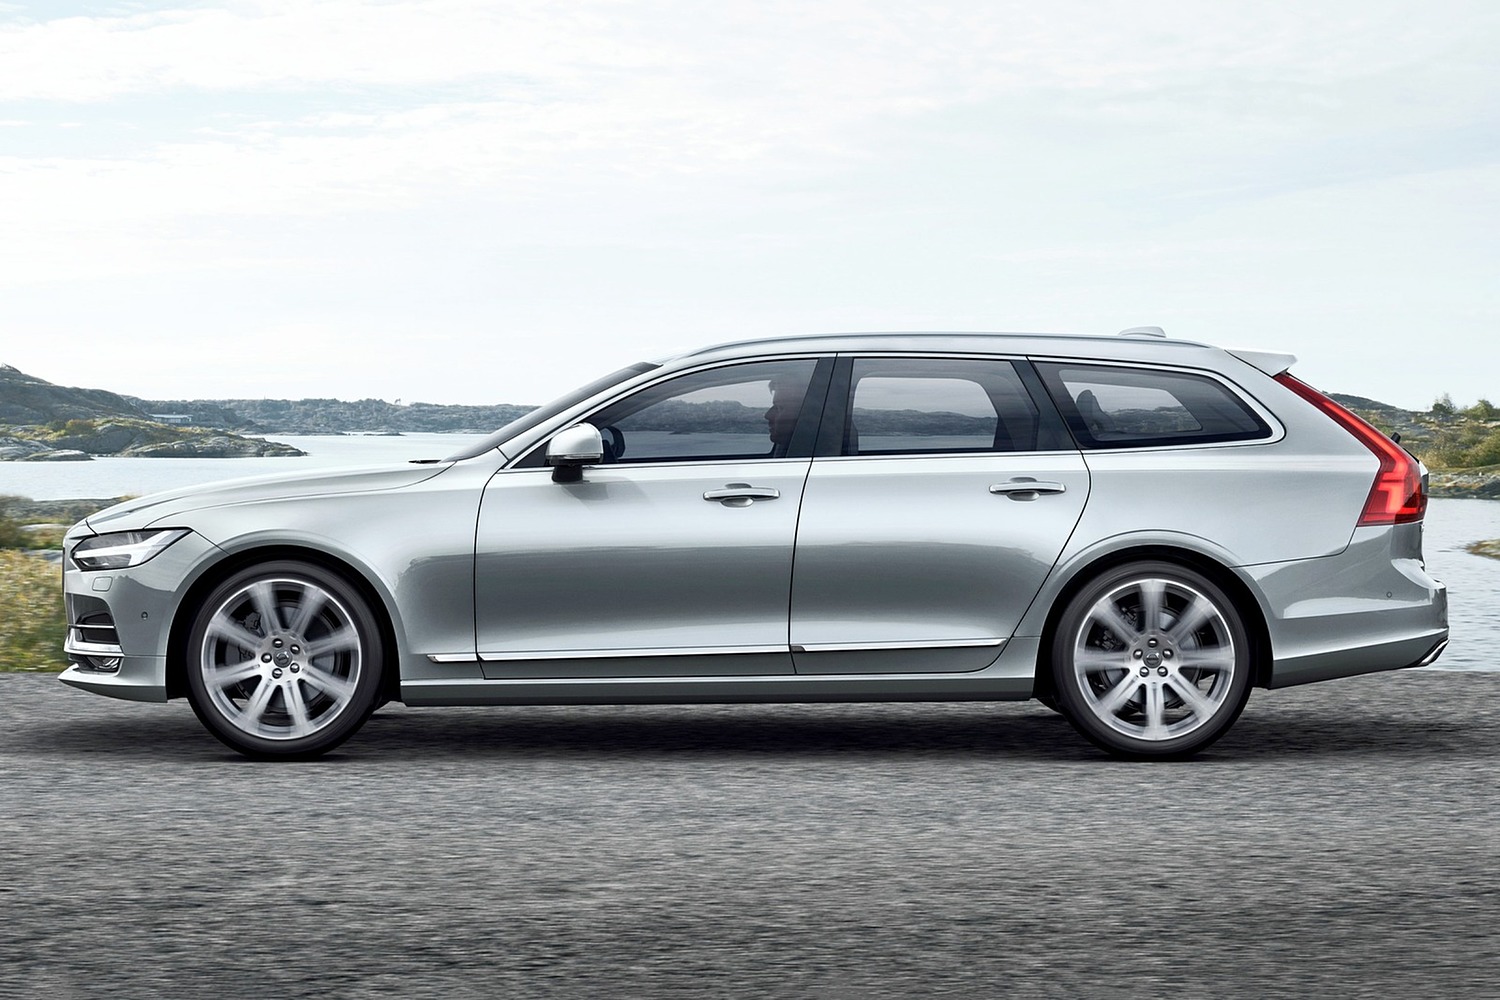 2018 Volvo V90 Wagon Exterior. Target Launch Spring 2017.